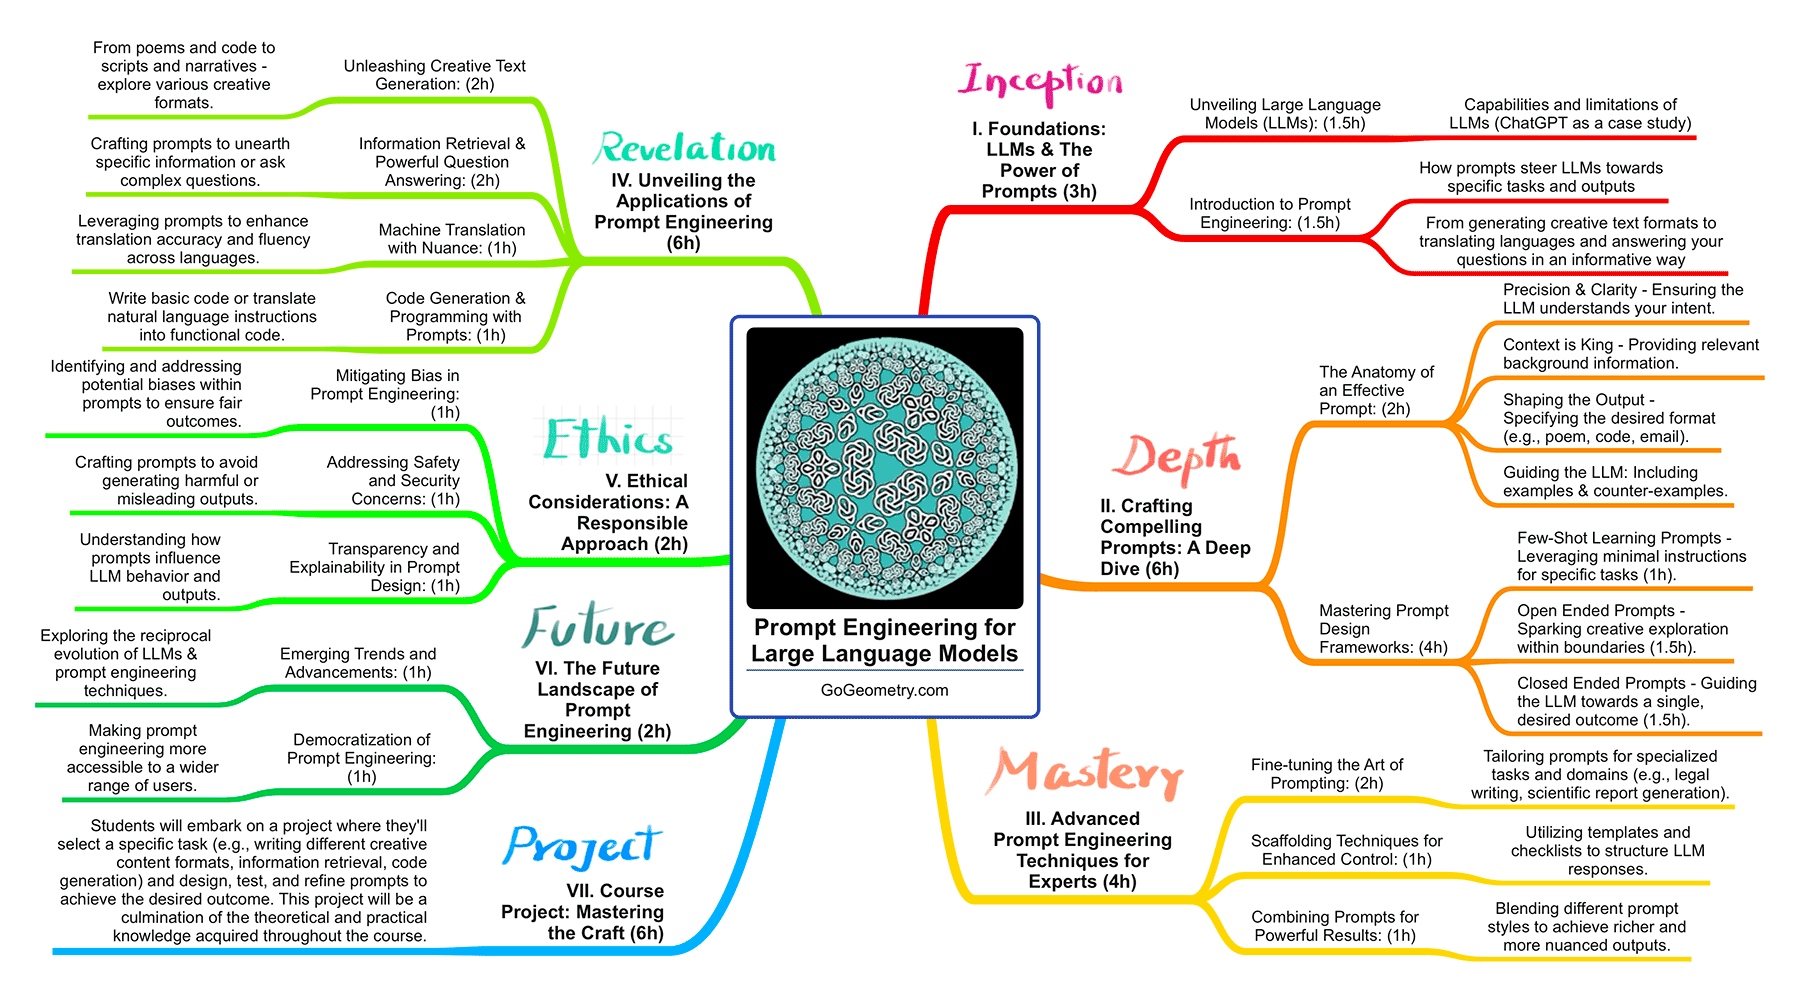 Mind map visualizing concepts of Prompt Engineering Course